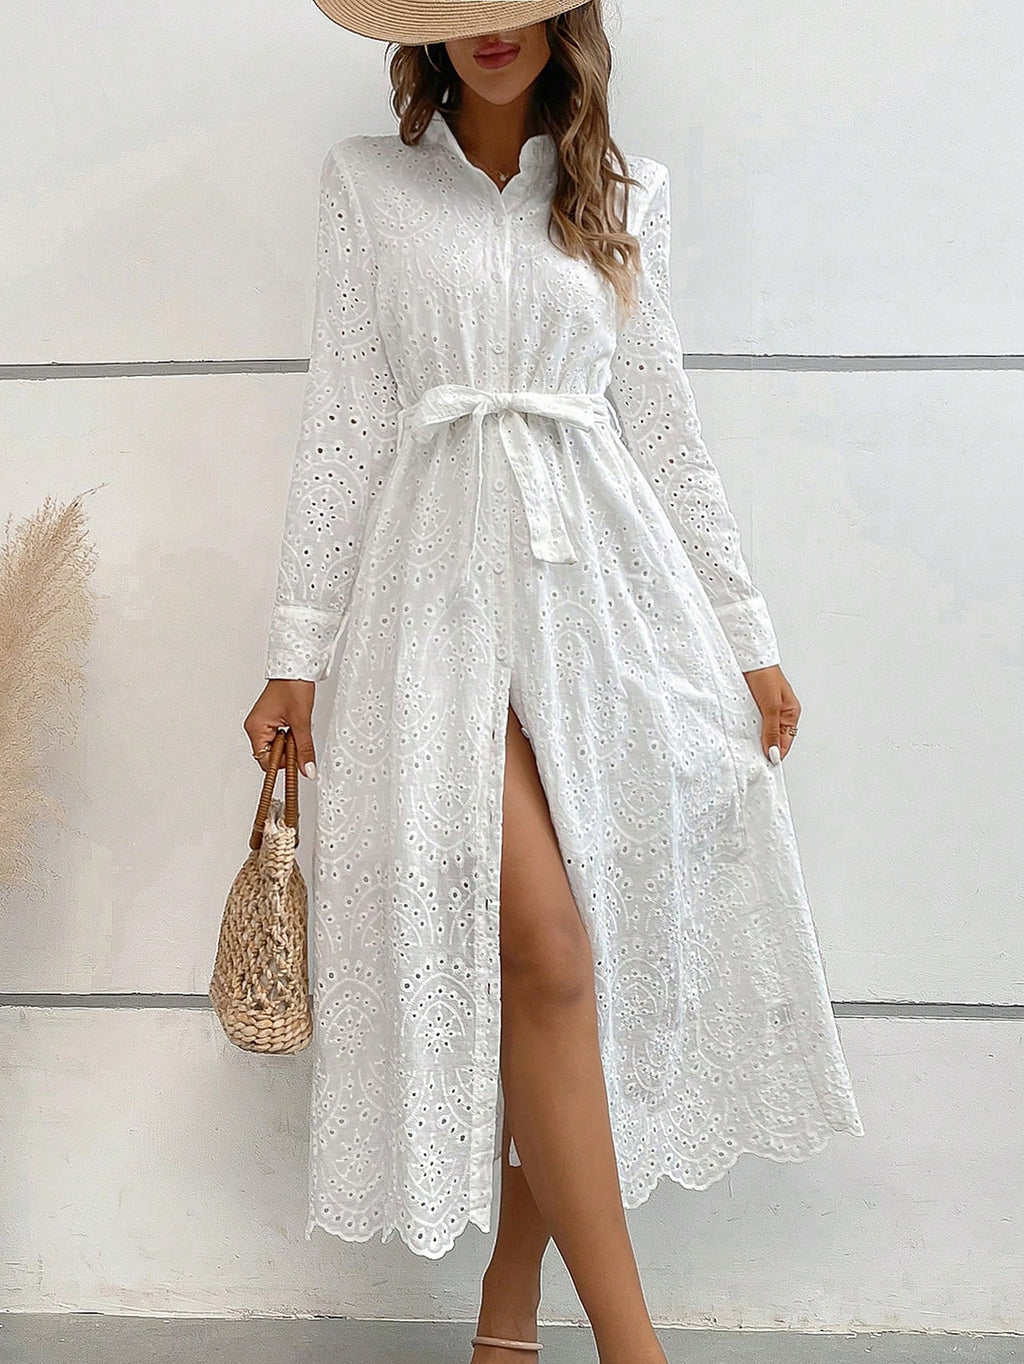 SHEIN LUNE Eyelet Embroidery Belted Shirt Dress